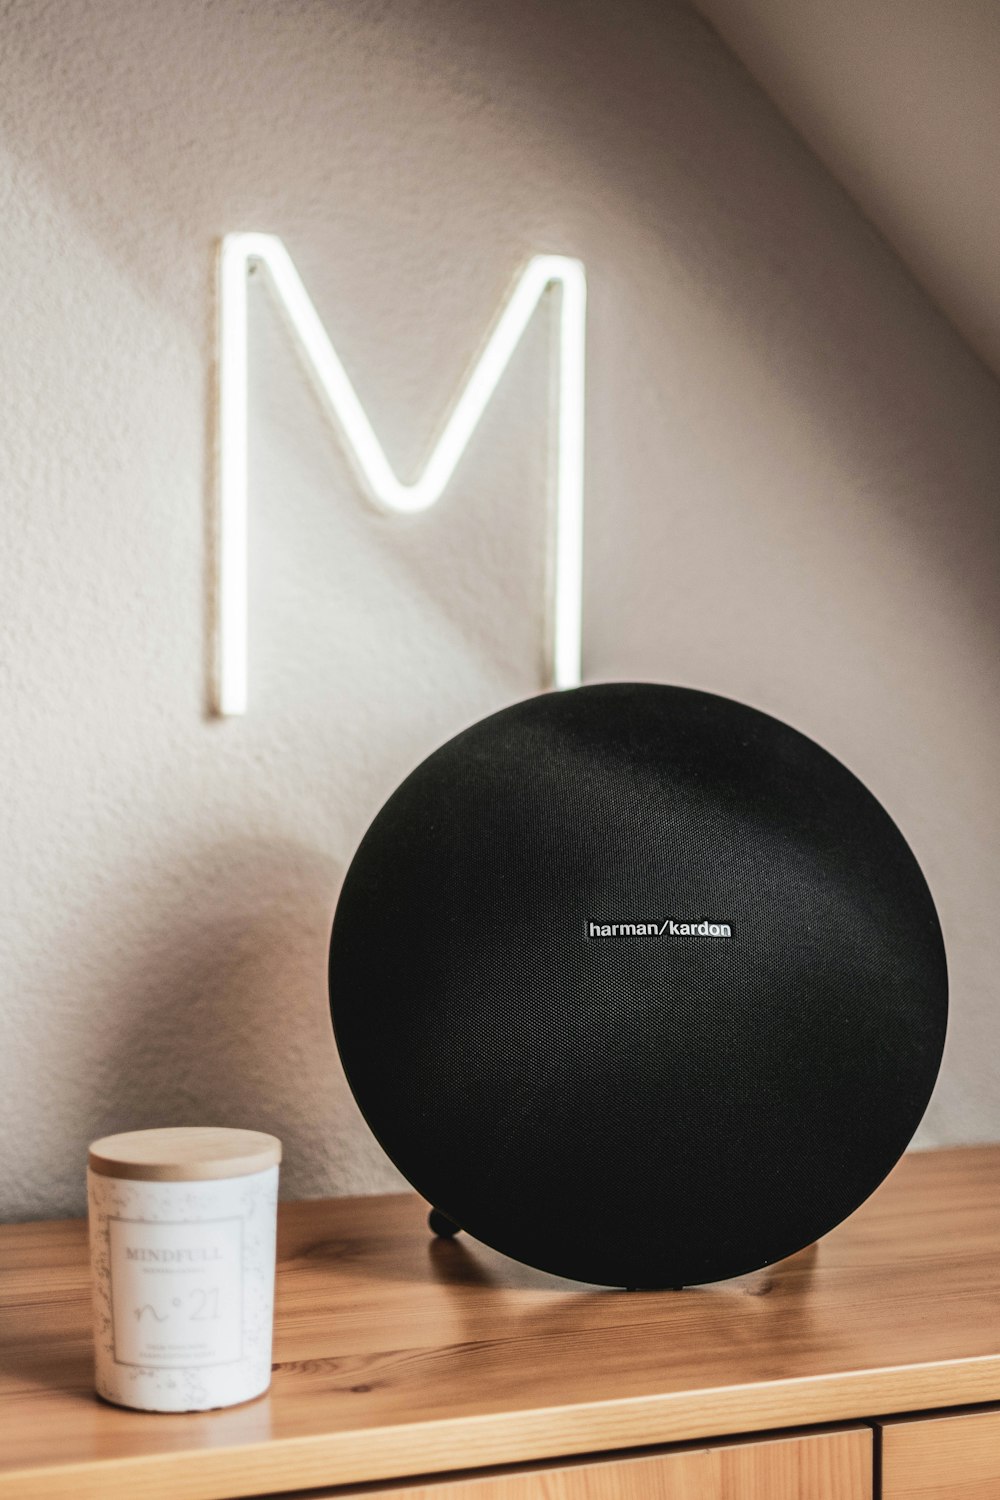 black round speaker beside white plastic cup on brown wooden table